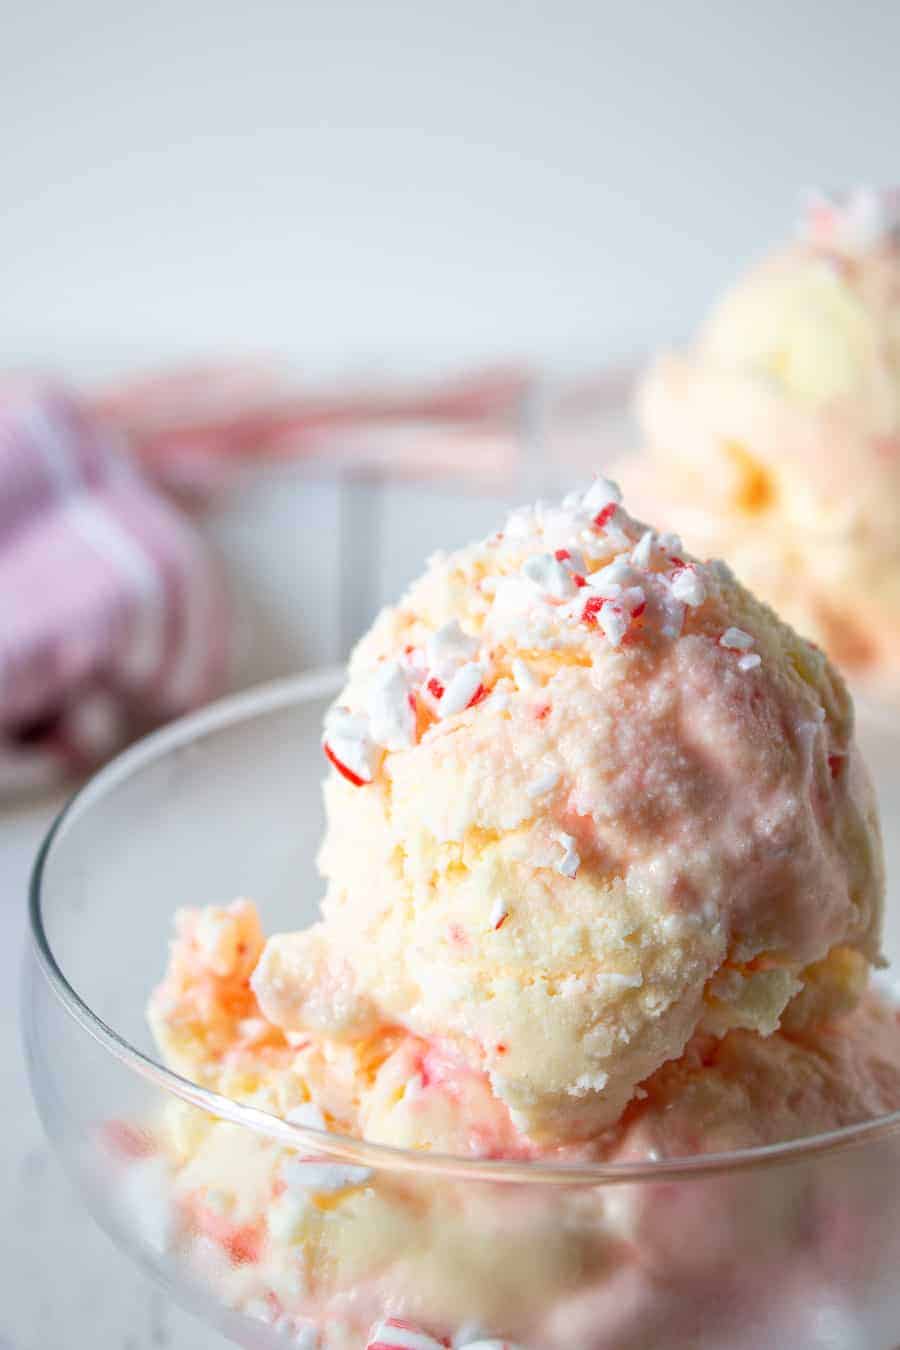 Large scoops of candy cane ice cream in glass dishes. 